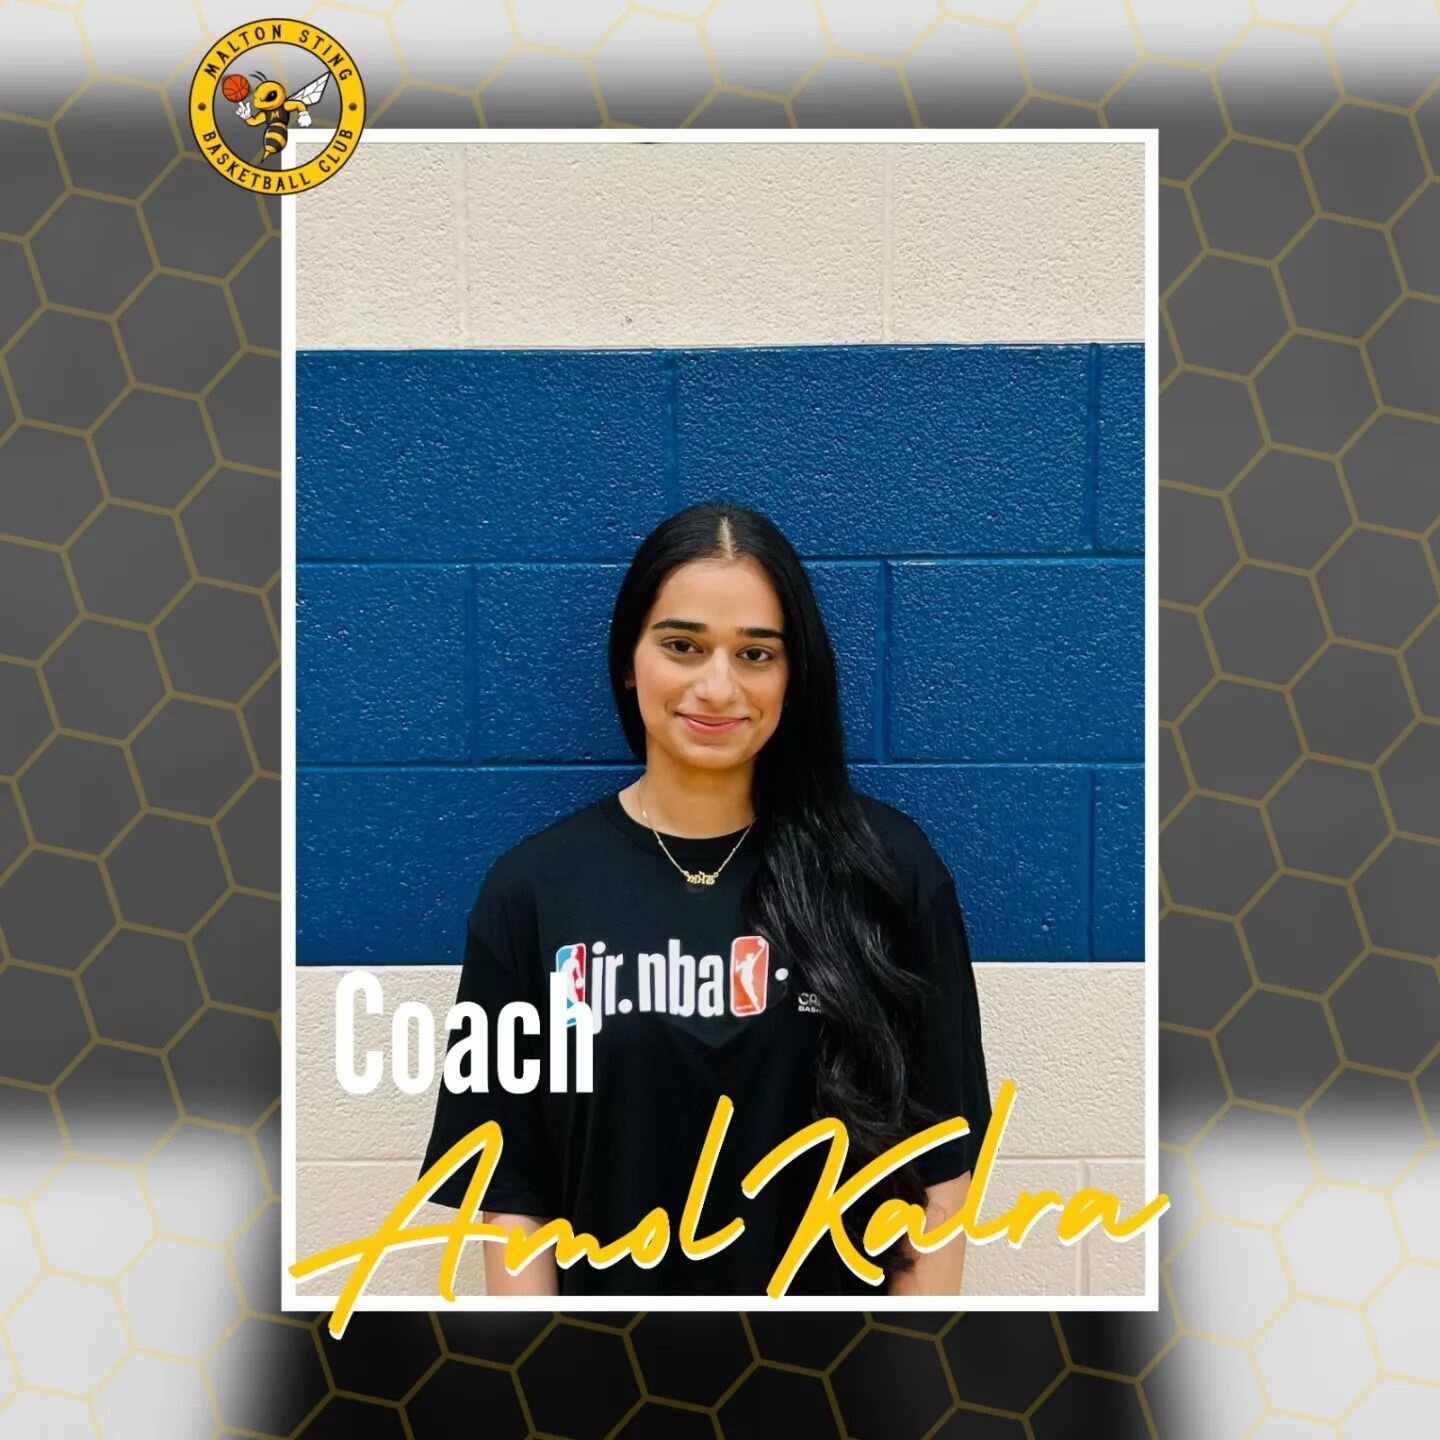 🐝Coach Amol started as a volunteer coach this season! She's always loved working with kids and wanted to get out of her comfort zone to try something new.🐝 

📝Coach Amol is currently in her fourth year at McMaster, double majoring in biology, psyc